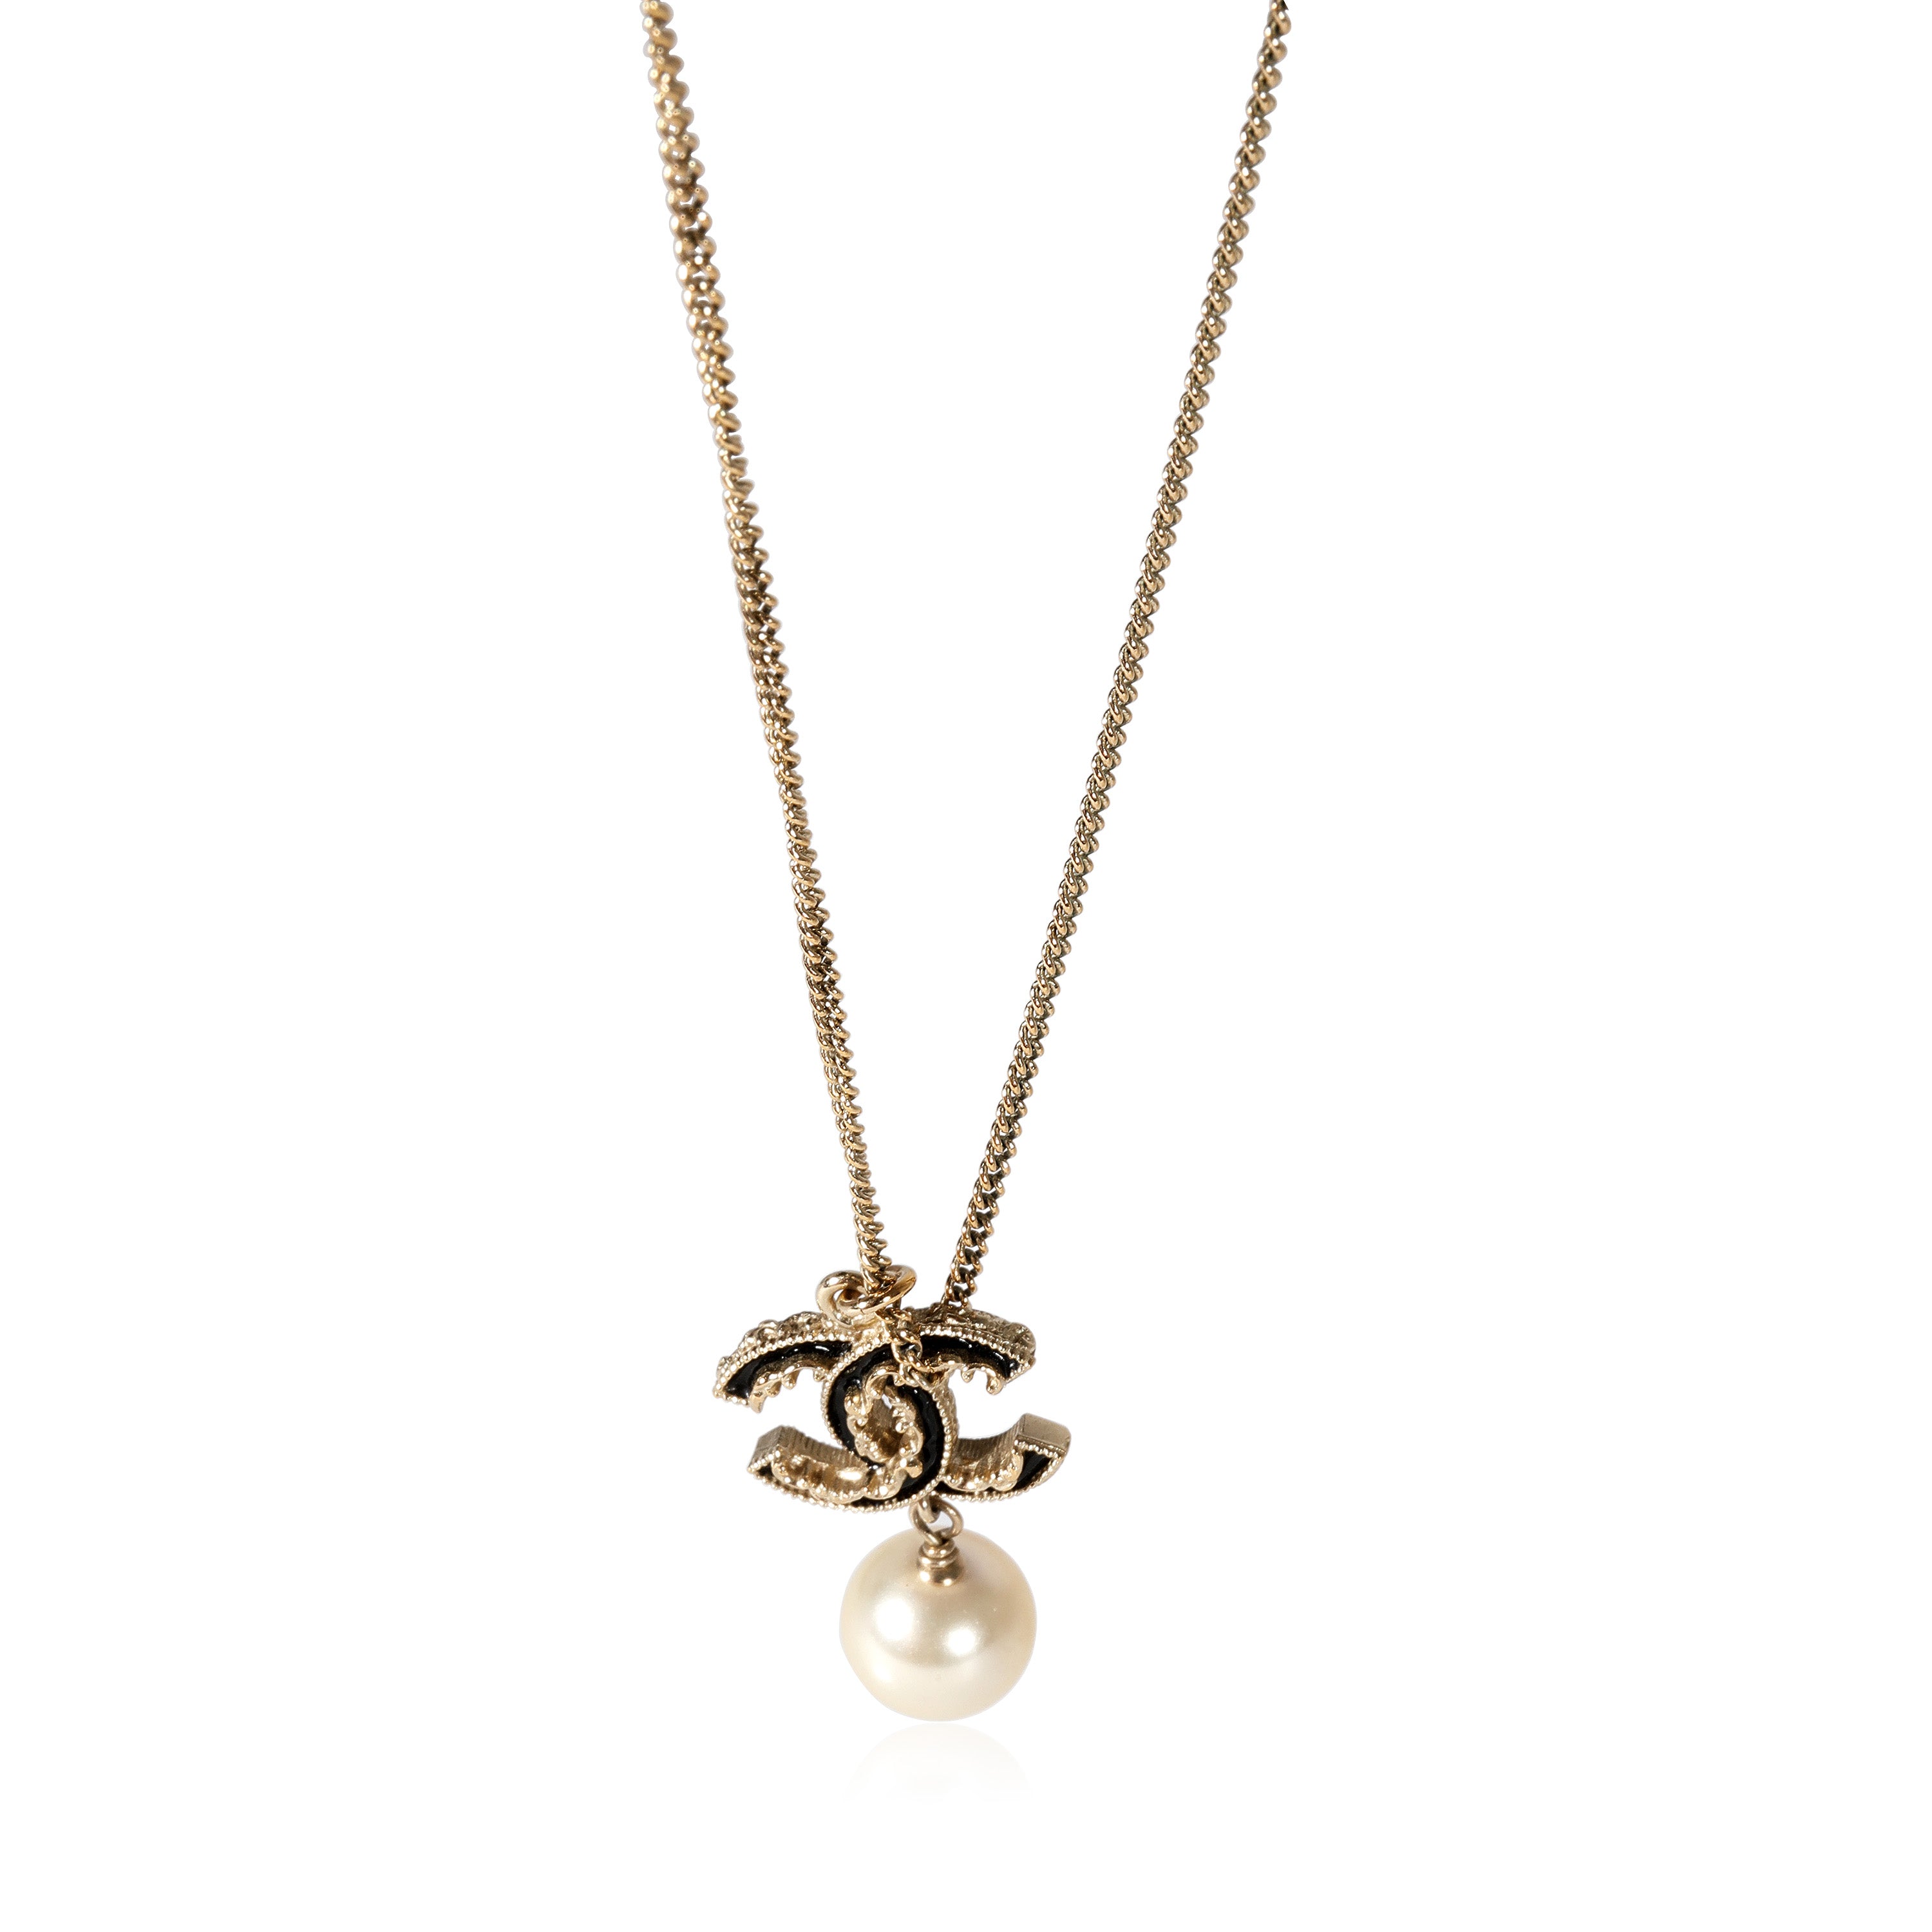 CHANEL 1980s Chanel Pendant Necklace